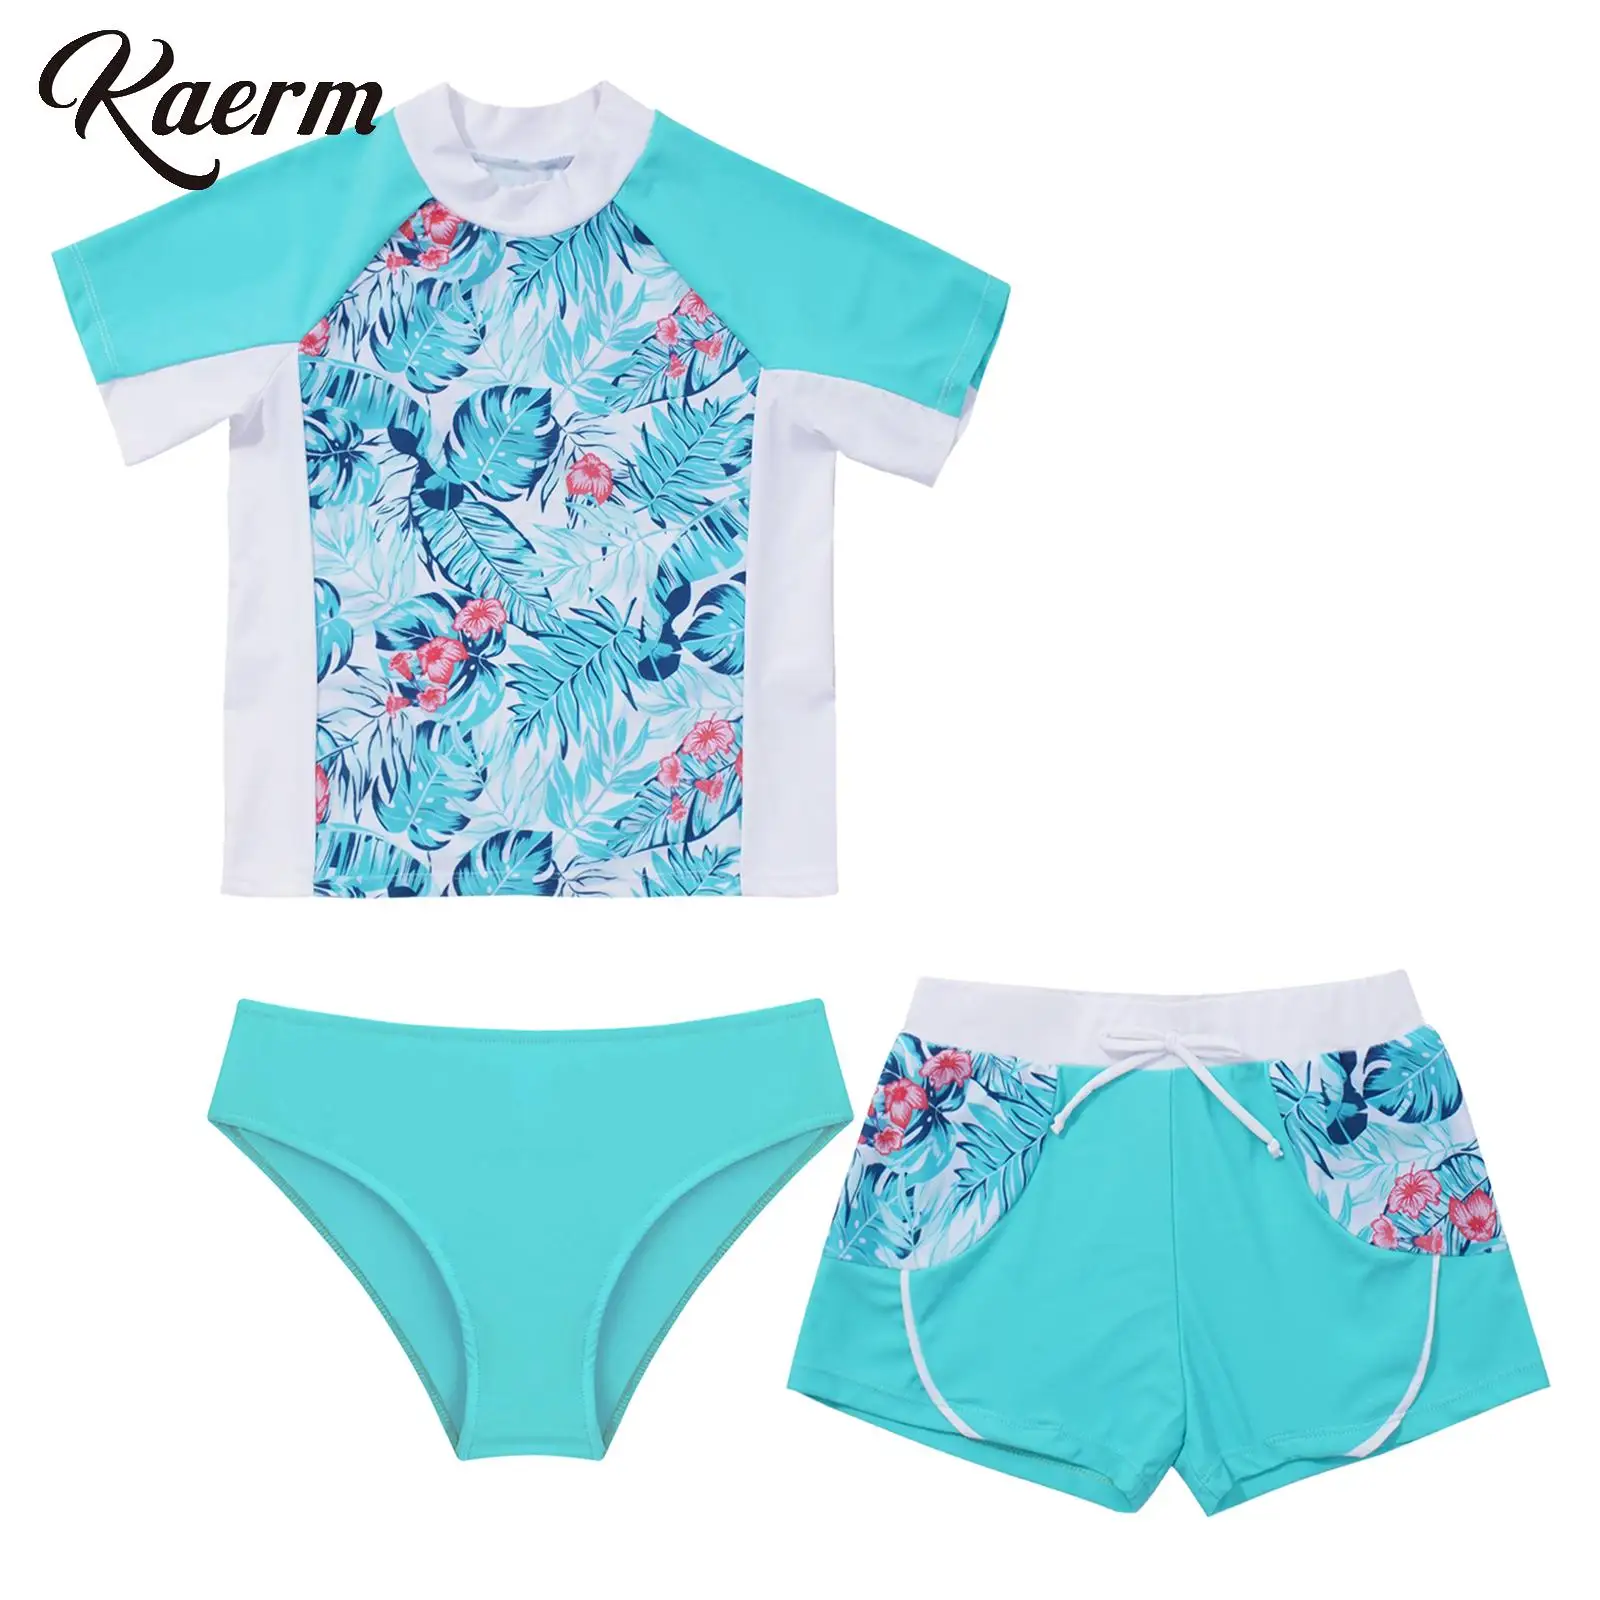 

3 Pcs Athletic Swimsuit for Girls Floral Short Sleeve Swim Shirts with Brief Shorts Beach Surfing Rash Guard Sets Bathing Suit